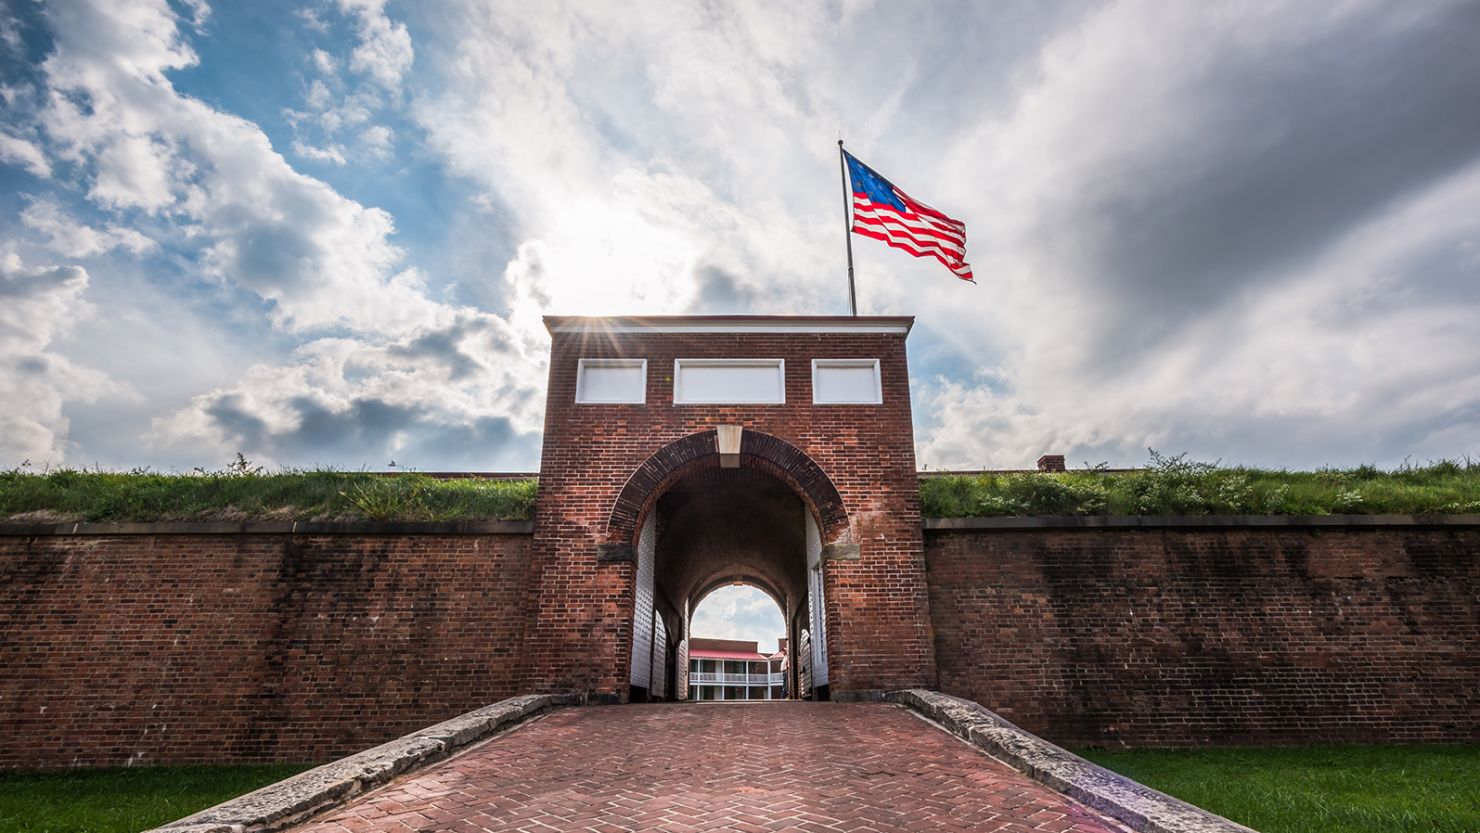 Historic American flying over the entrance to Fort McHenry National Monument, Baltimore, Maryland